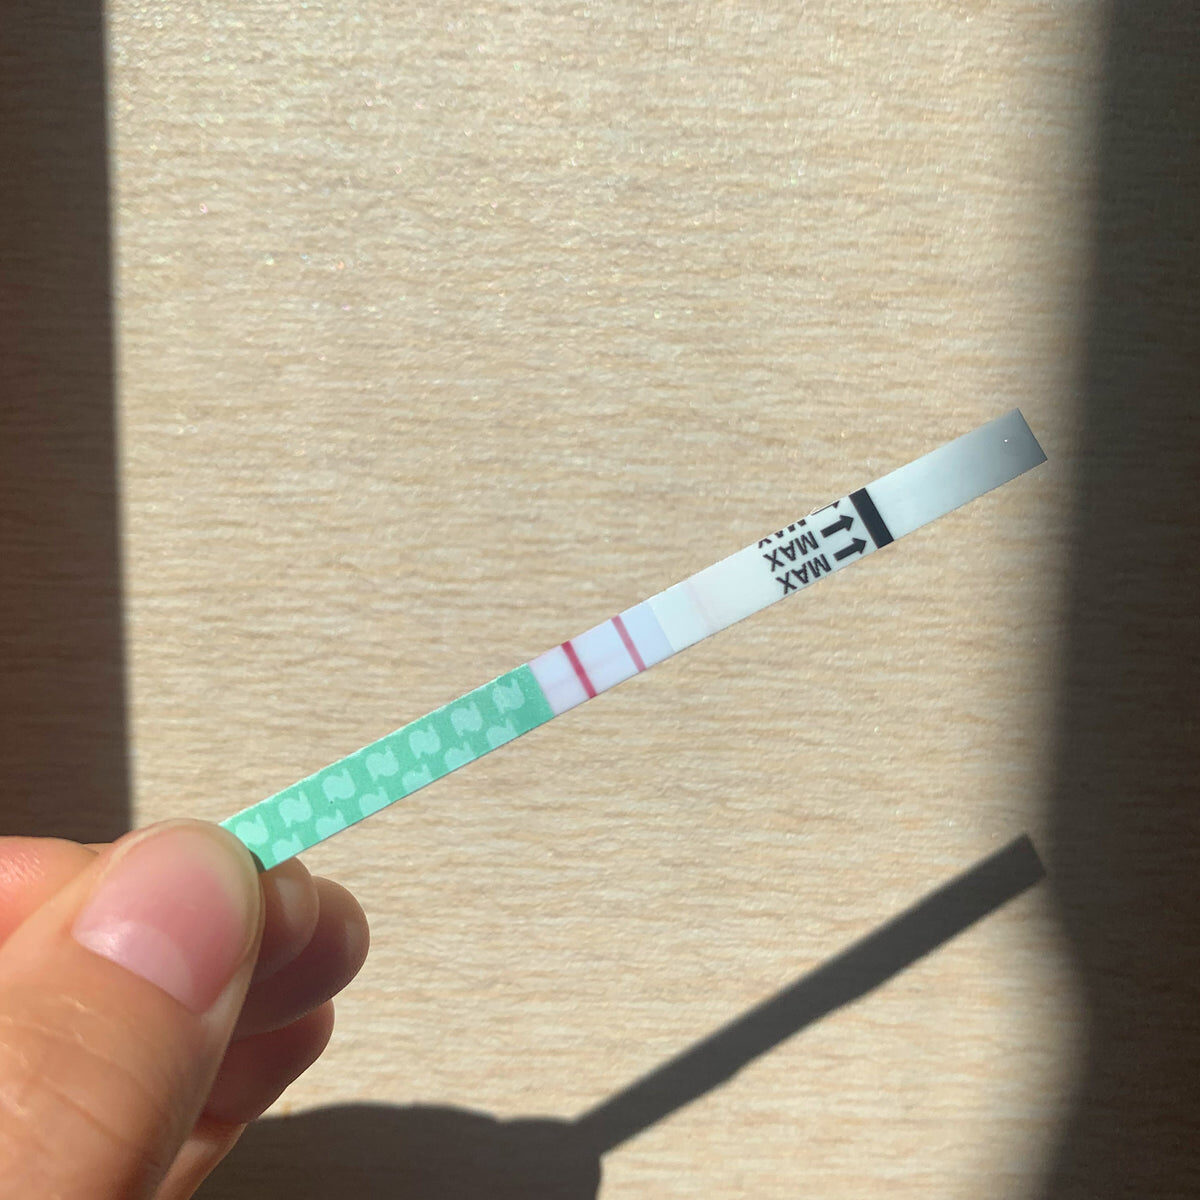 Image Of A Pregnancy Test Strip With Two Lines